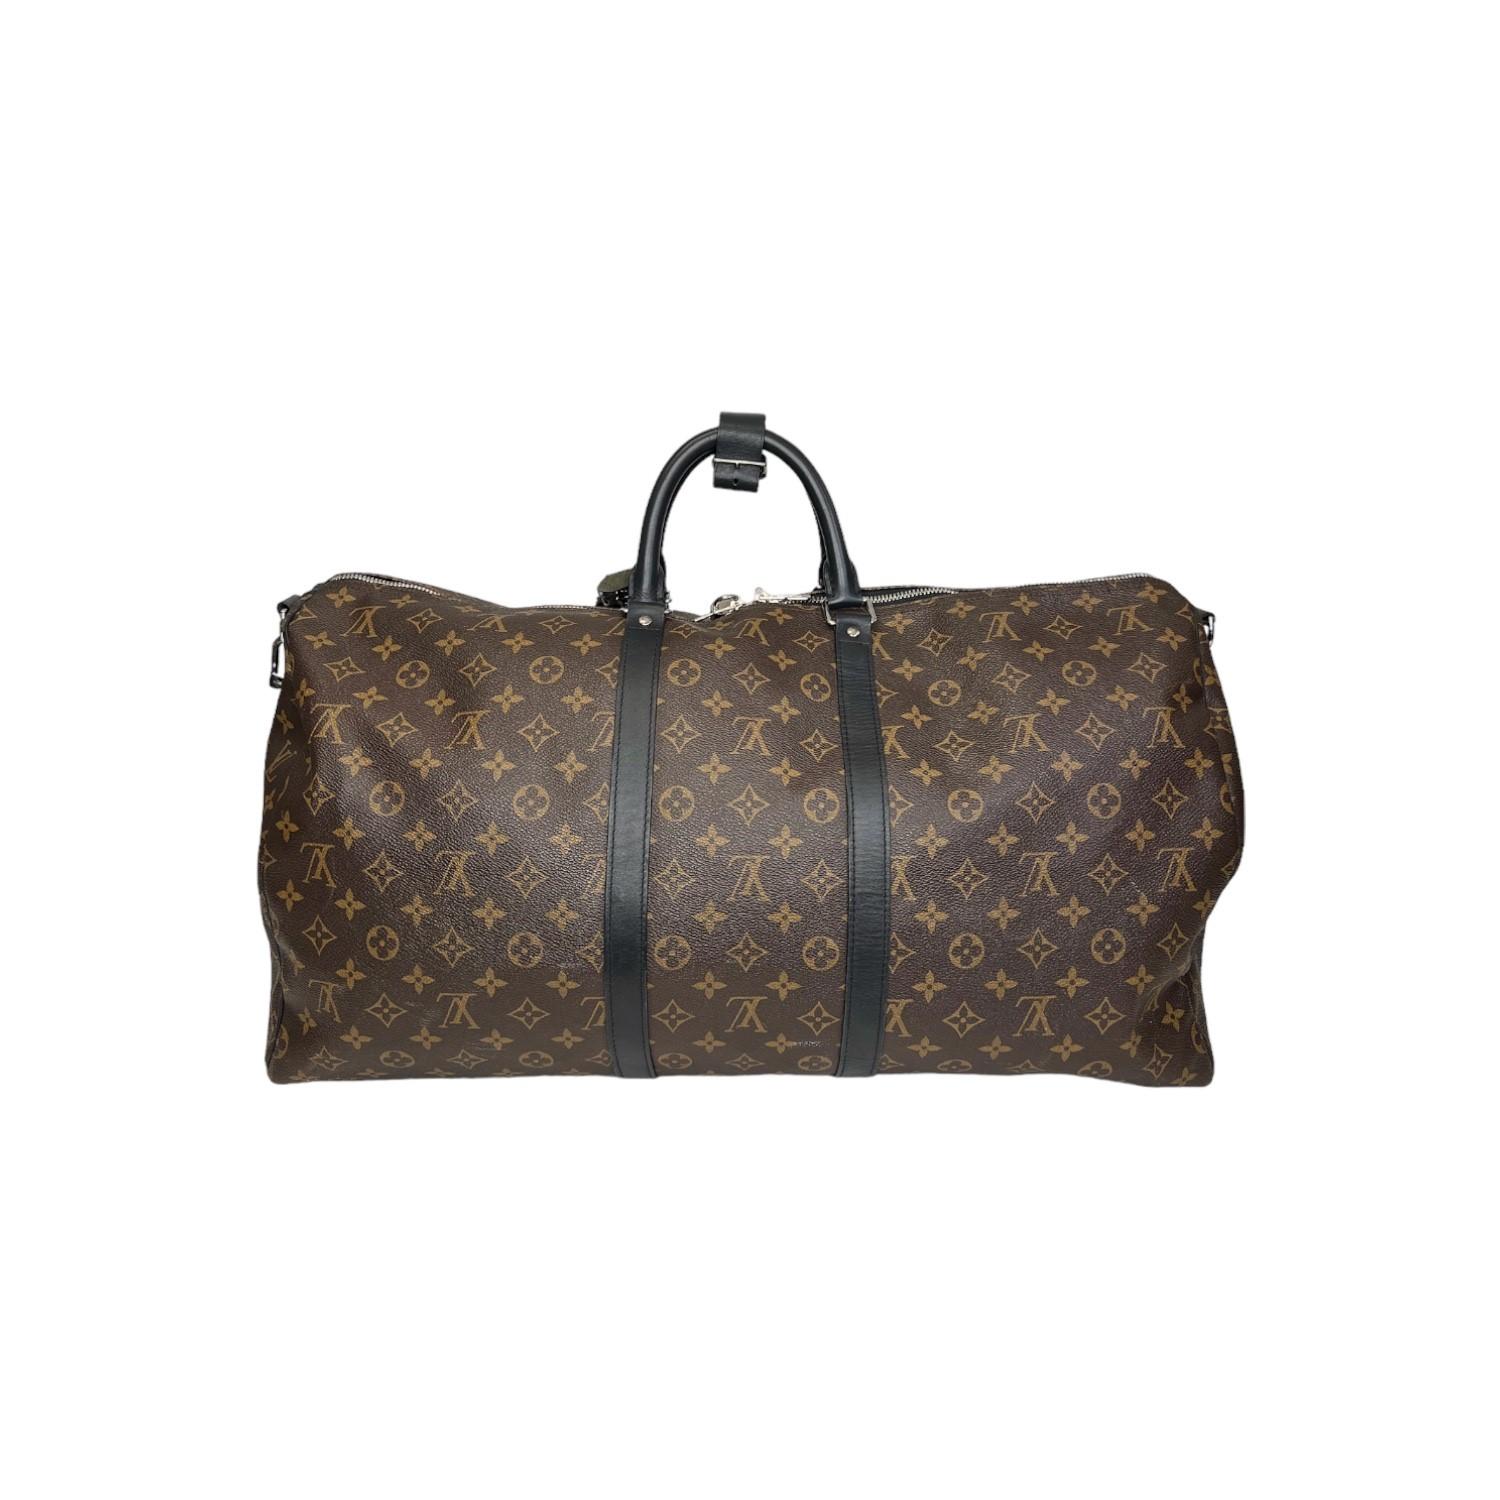 This Louis Vuitton Monogram Macassar Keepall Bandoulière 55 travel bag was made in the 40th week of 2018 in France and it is finely crafted of the classic Louis Vuitton Monogram Macassar canvas exterior with black leather trimming and silver-tone